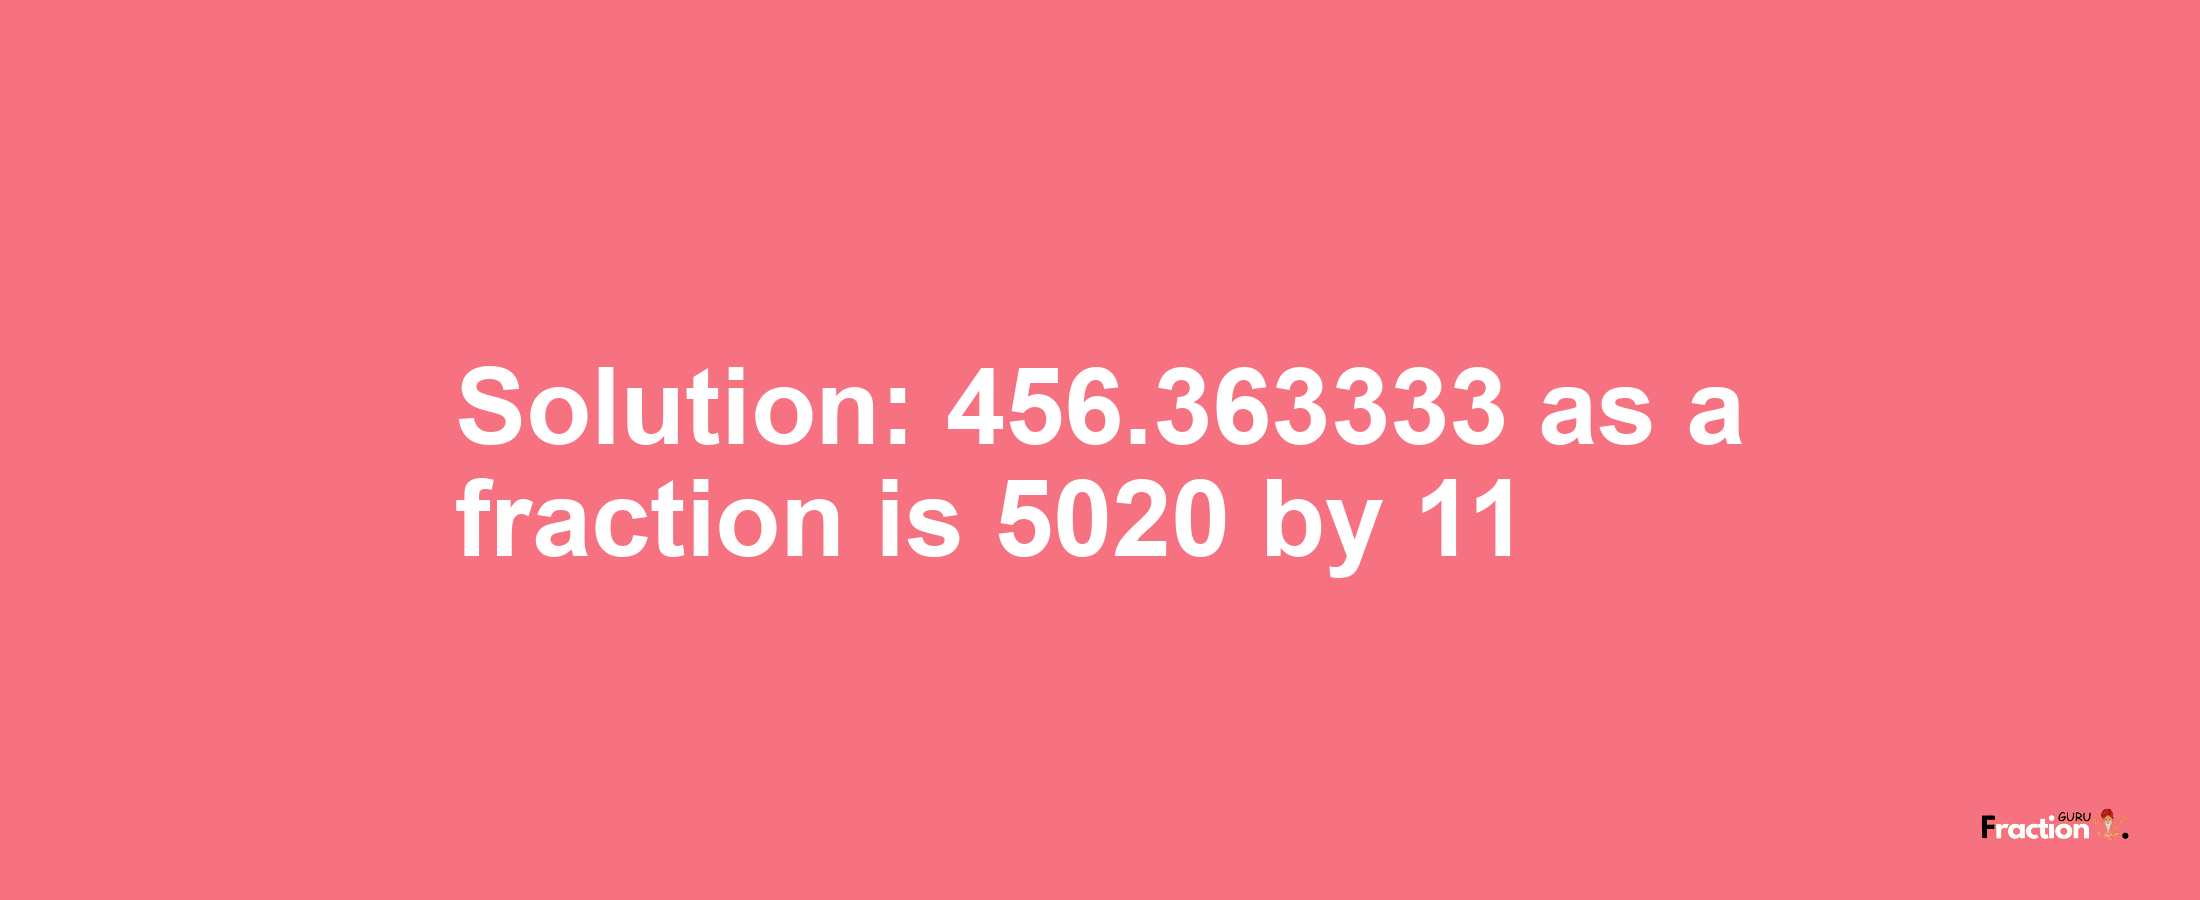 Solution:456.363333 as a fraction is 5020/11